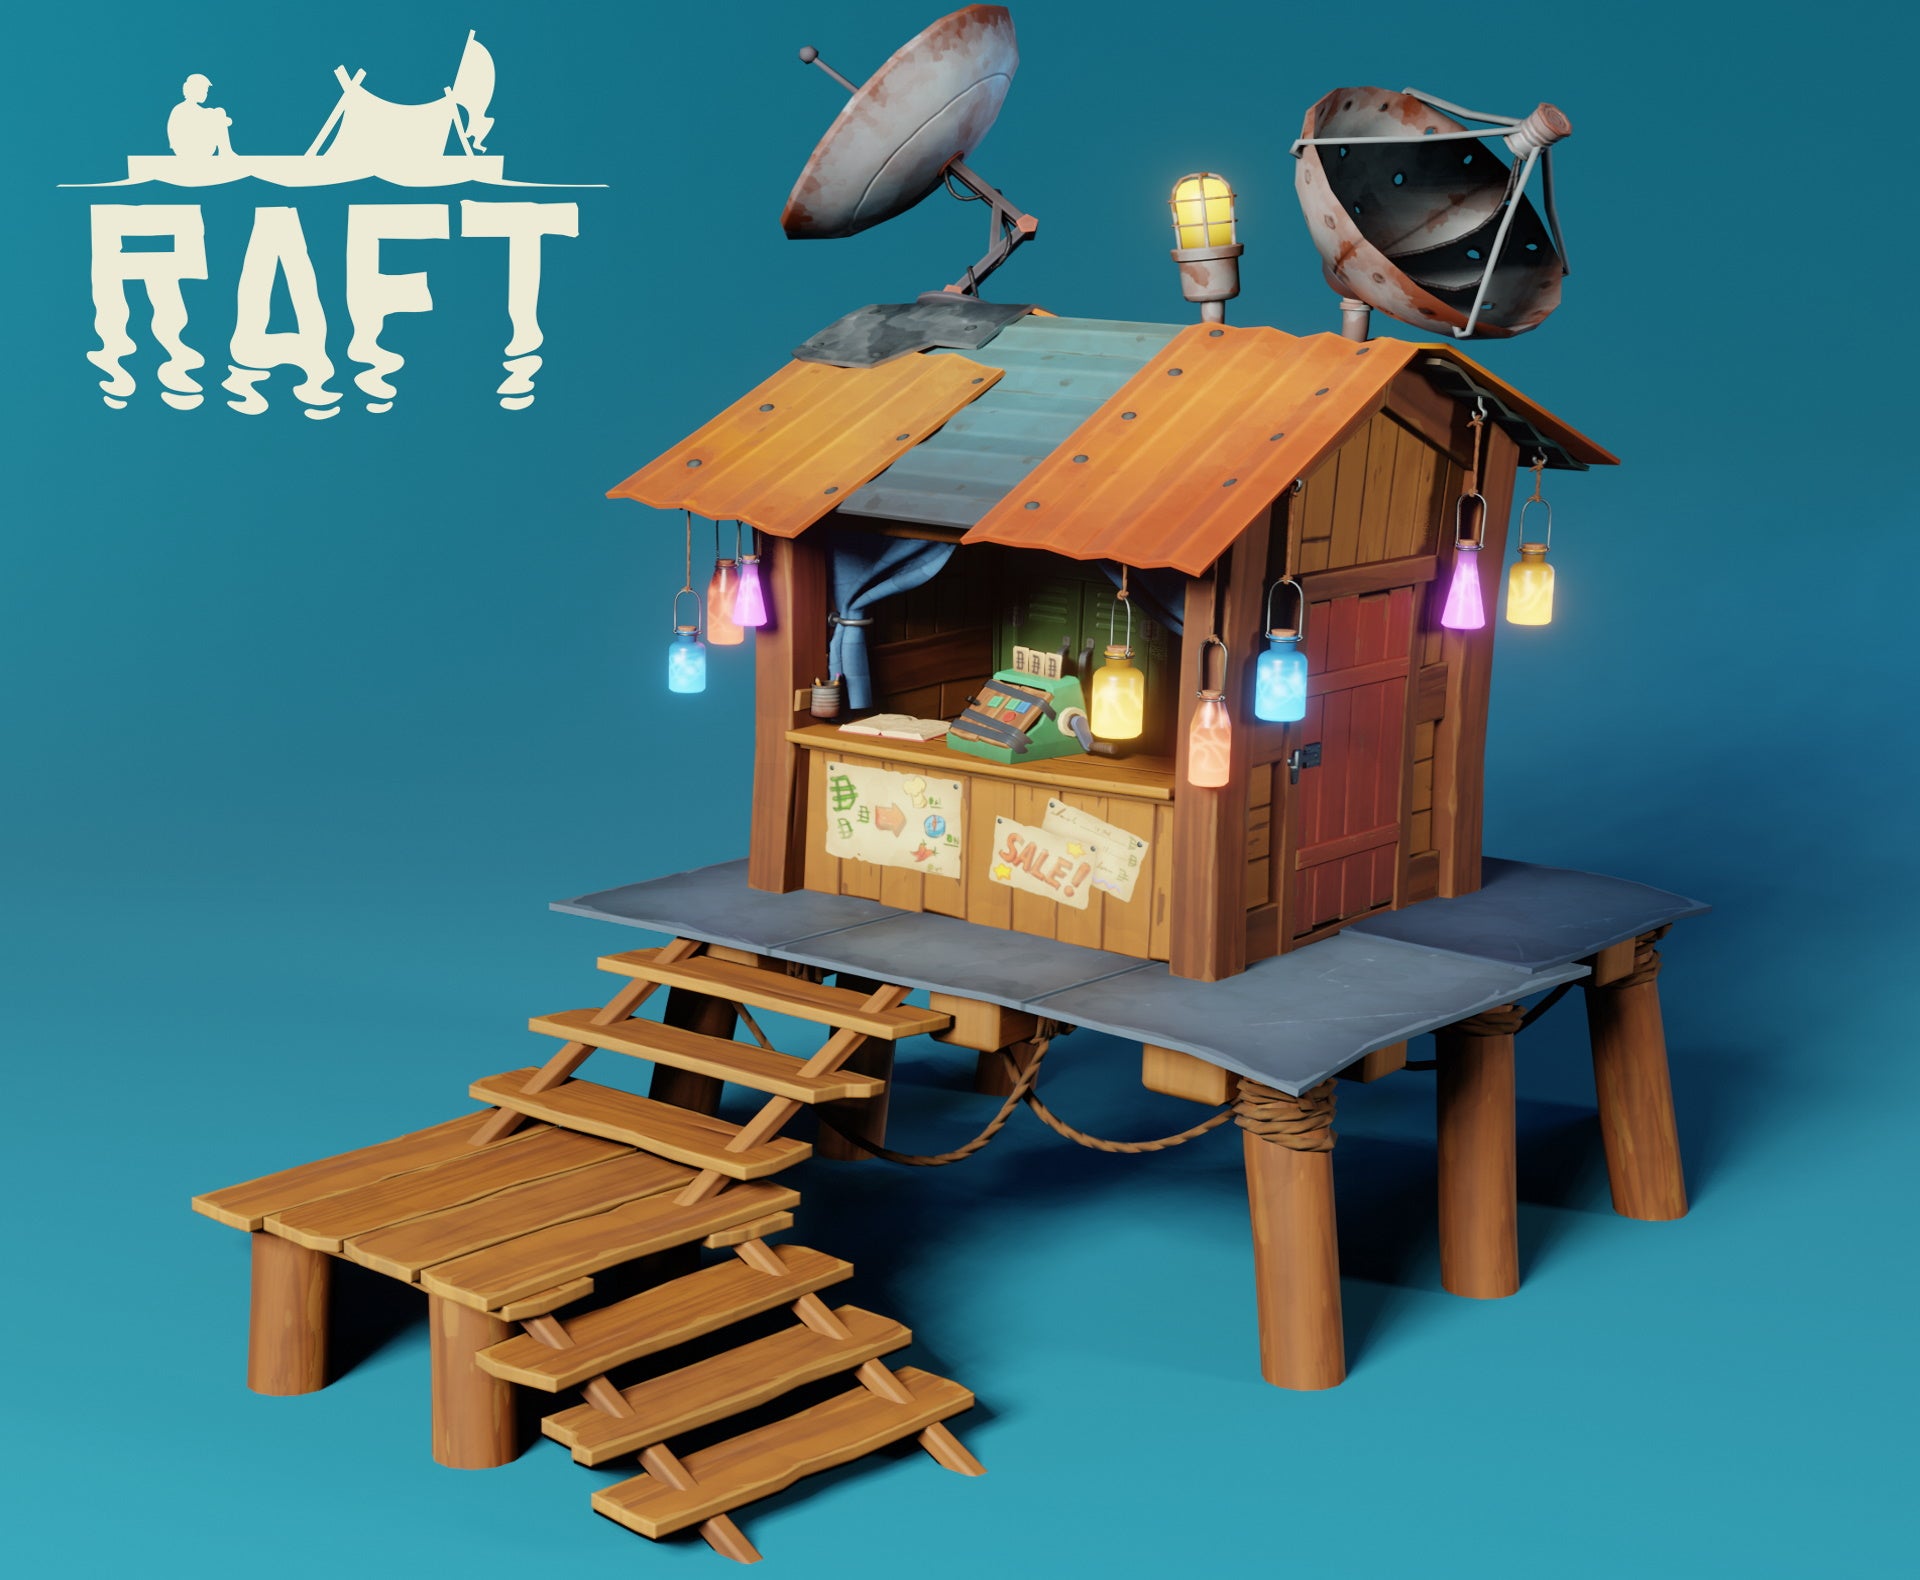 The trading post in Raft where you spend Trash Cubes sits against a blue background